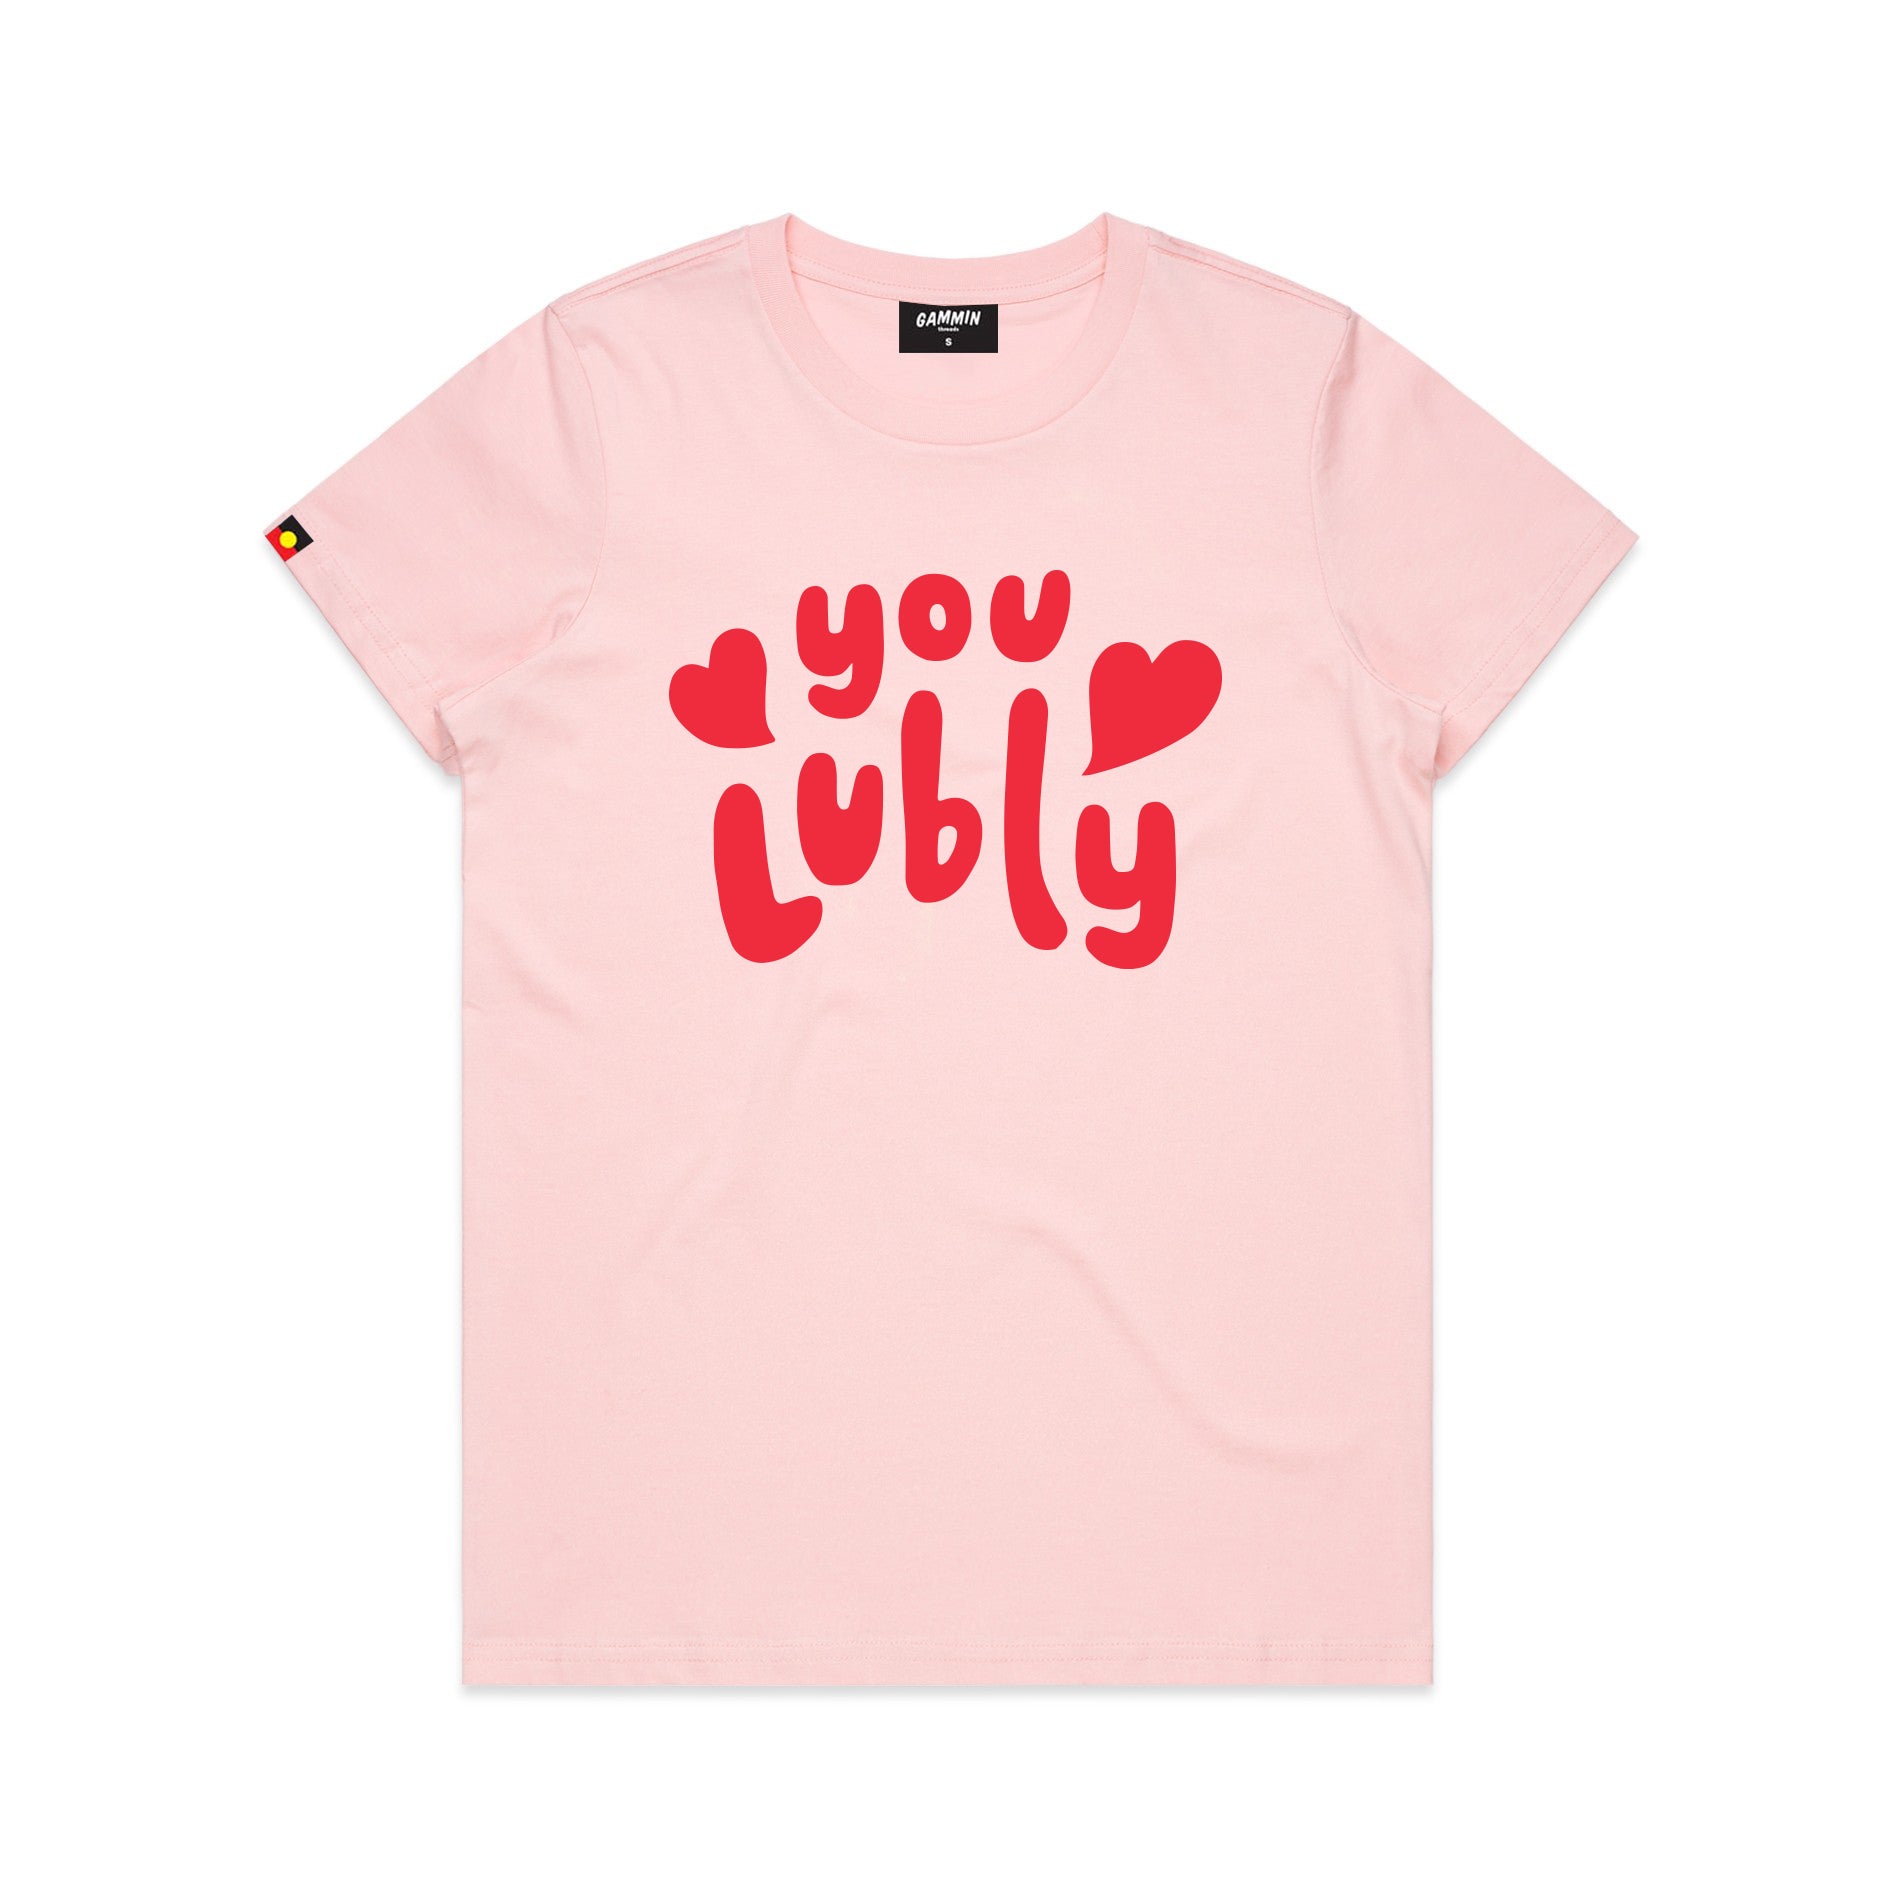 Lubly tee pink